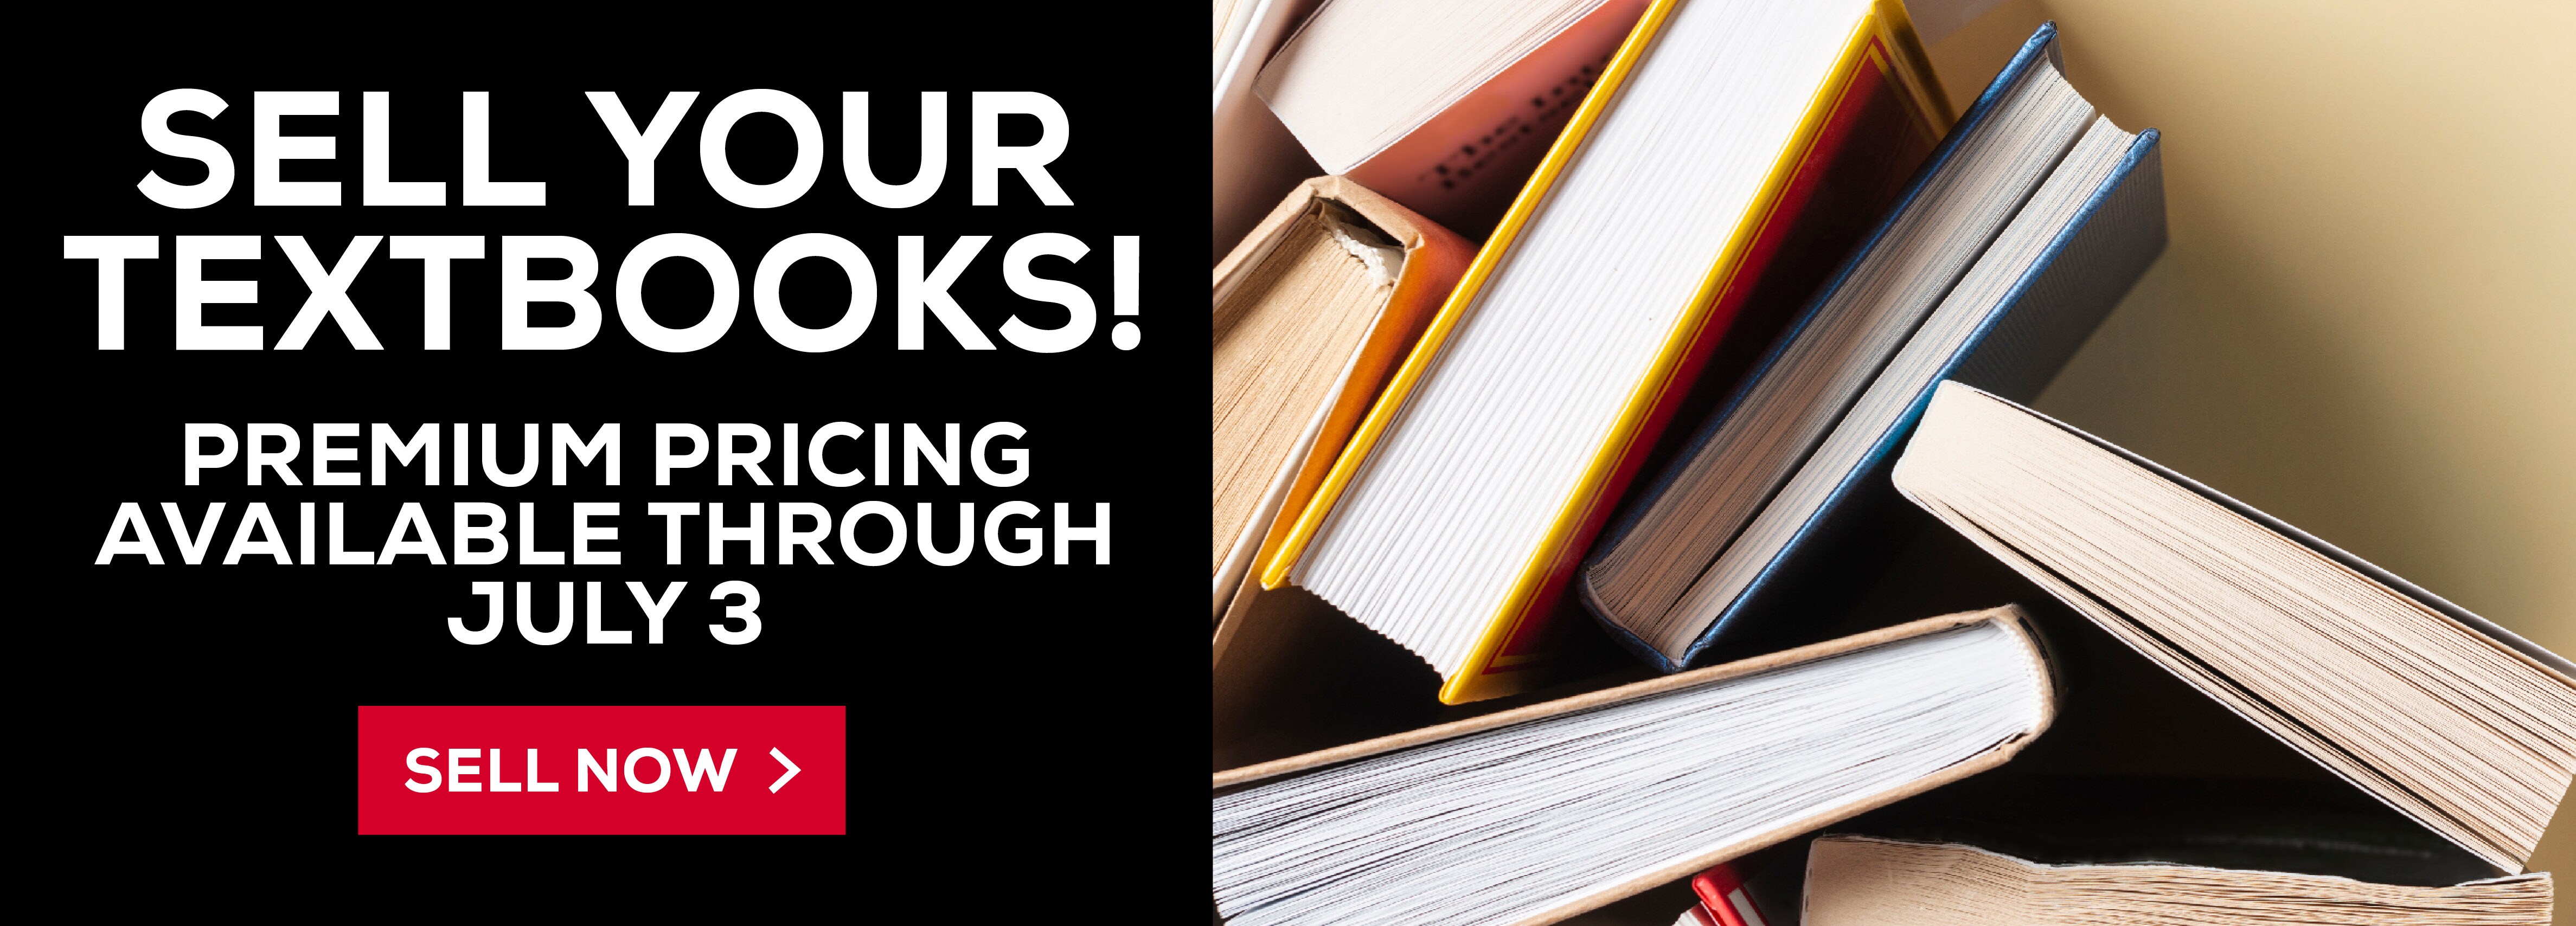 Sell Your Textbooks! Premium pricing available through July 3. Sell Now!					